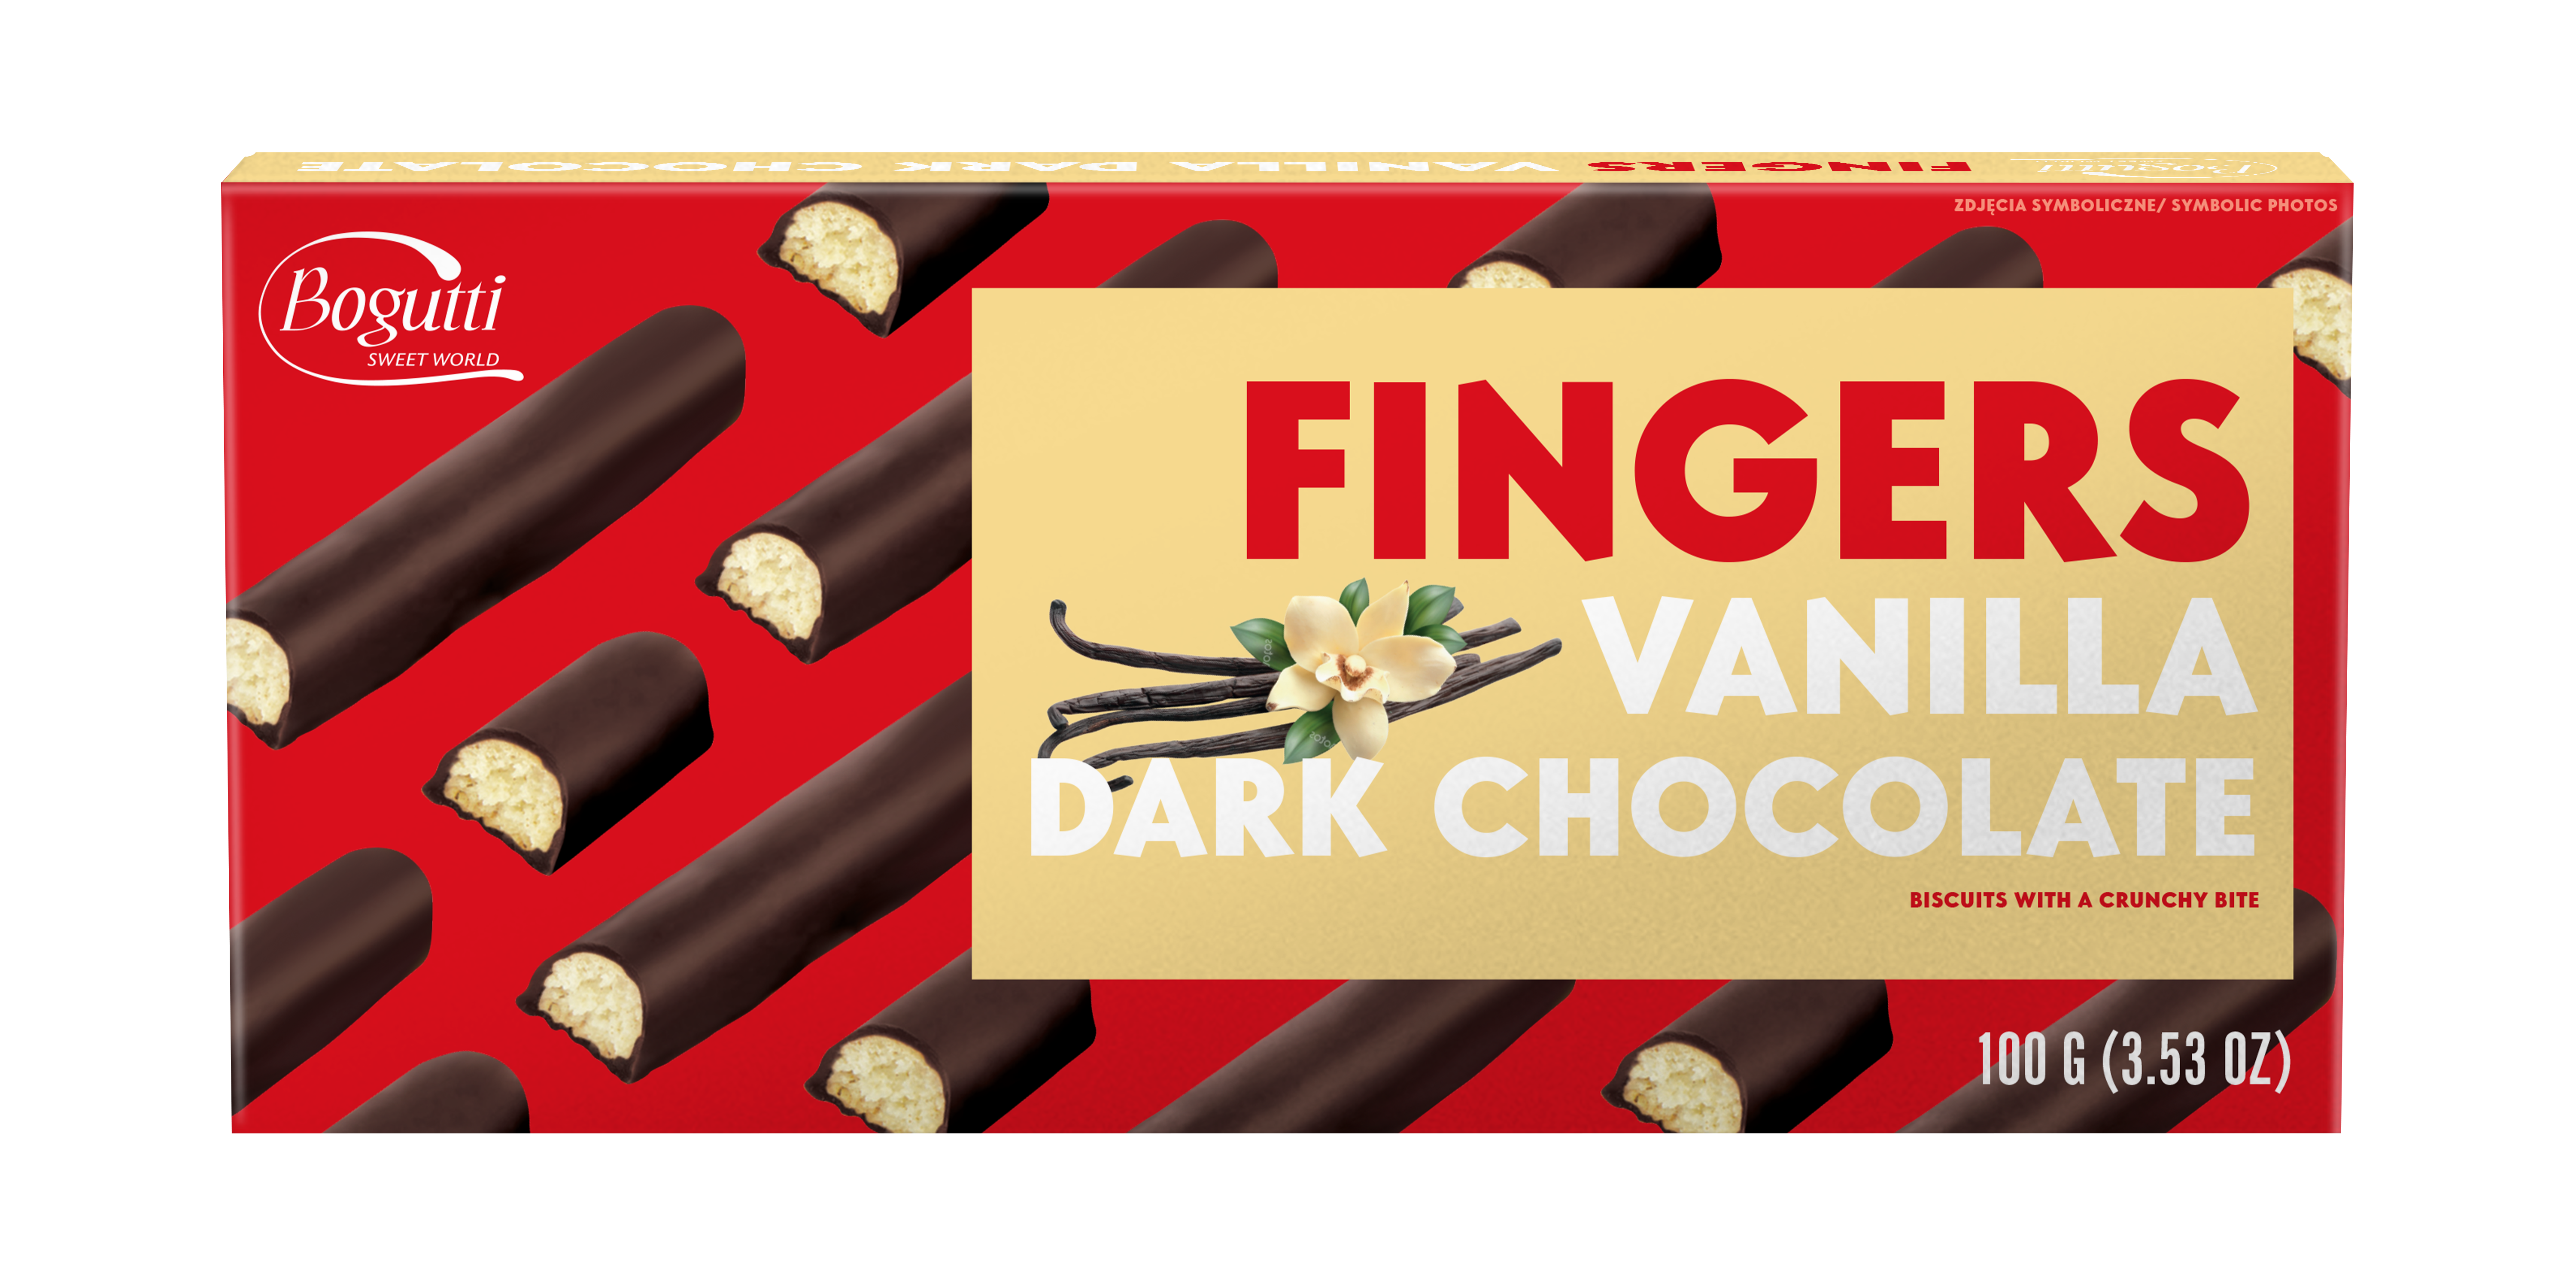 Fingers – Vanilla biscuits with cocoa coating